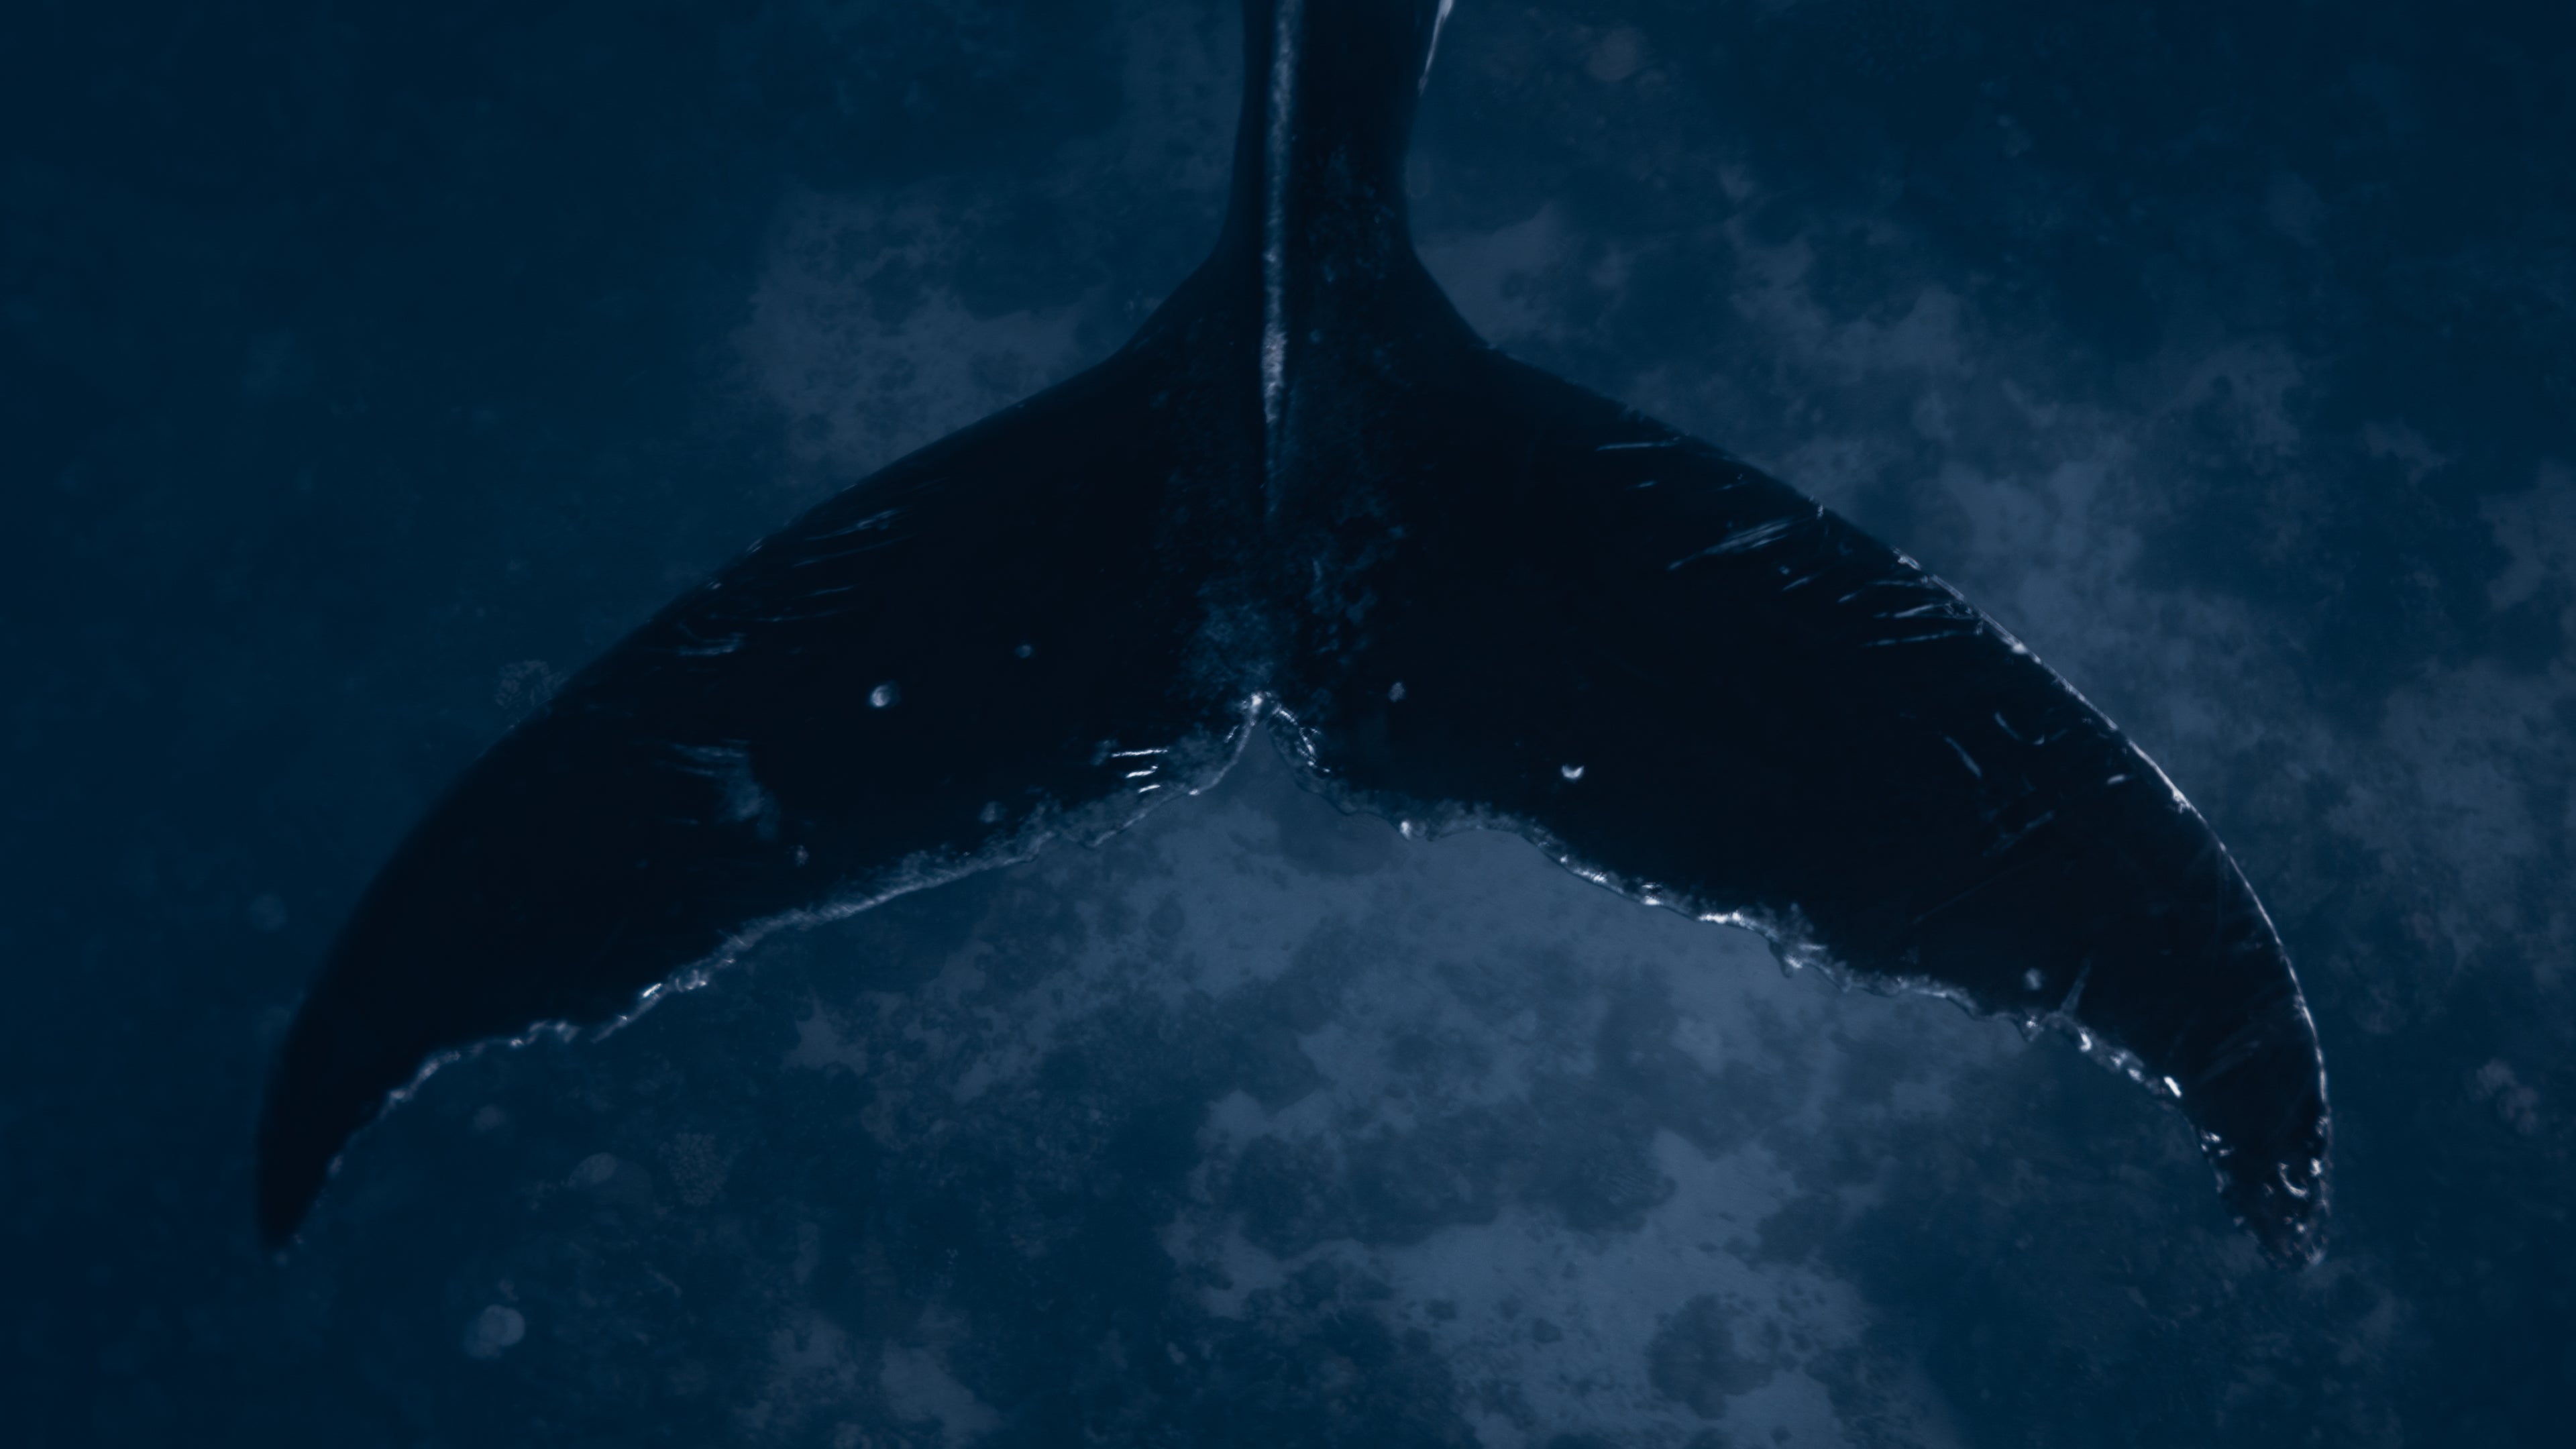 tail of a rested humpback whale against the shallow reef sandy ocean bottom